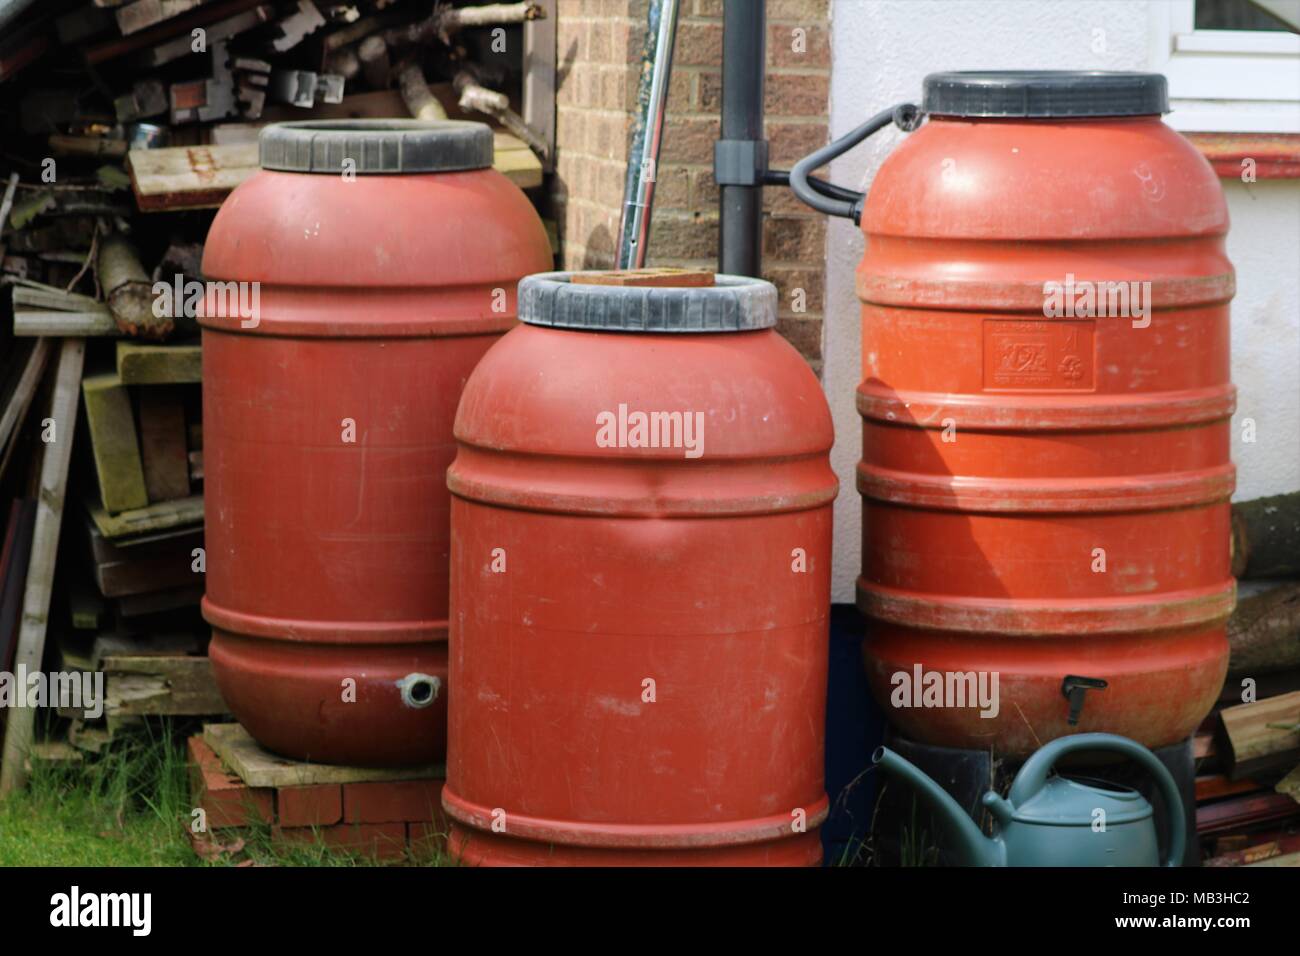 Three red water butts and green watering can in a garden Stock Photo